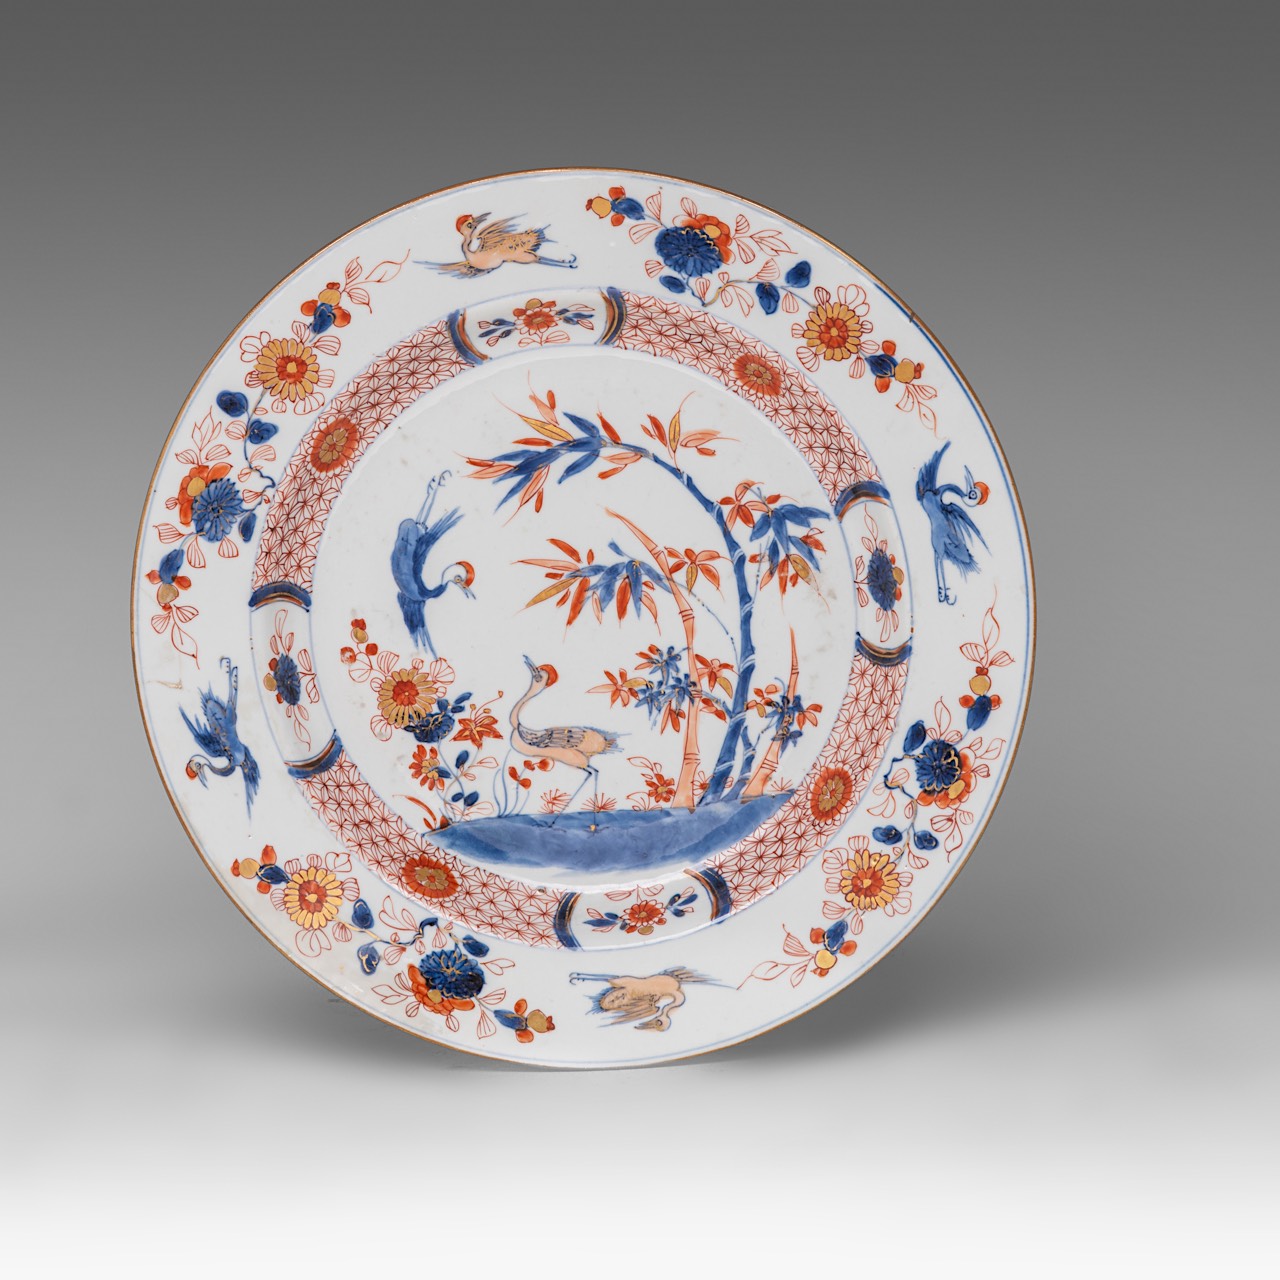 A Chinese Imari 'Flower garden' charger and plate, 18thC, dia 31,5 - 38,5 cm - Image 4 of 5